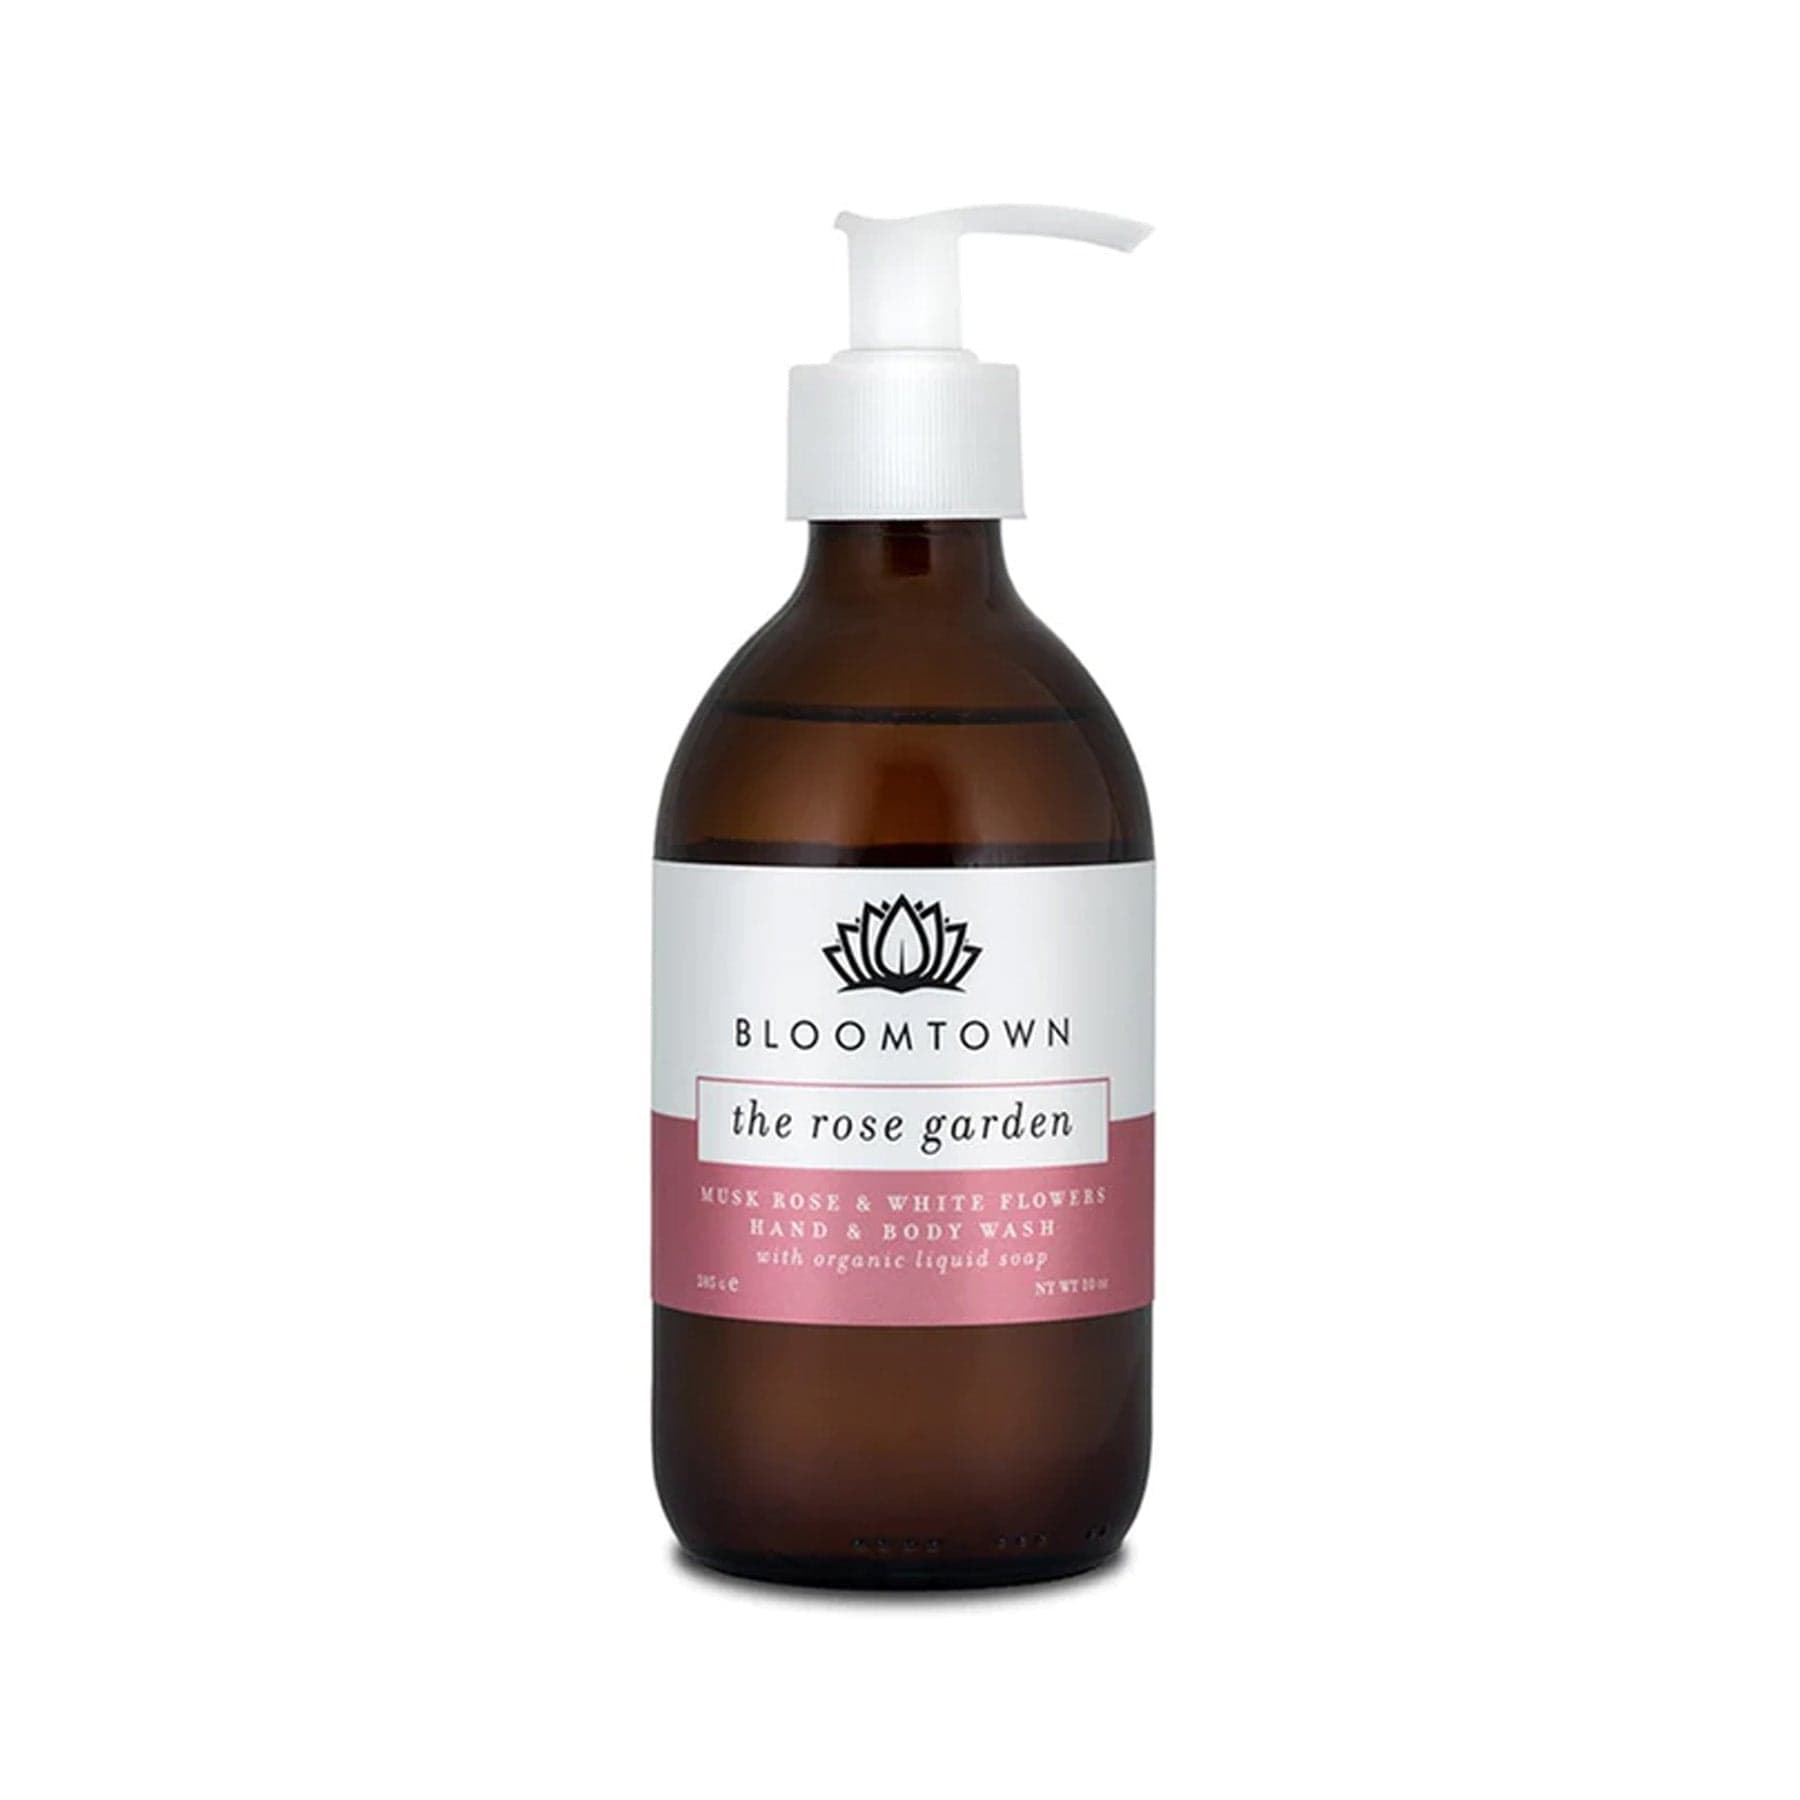 Bloomtown The Rose Garden musk rose and white flowers hand and body wash with organic liquid soap in amber bottle with white pump dispenser on a plain background